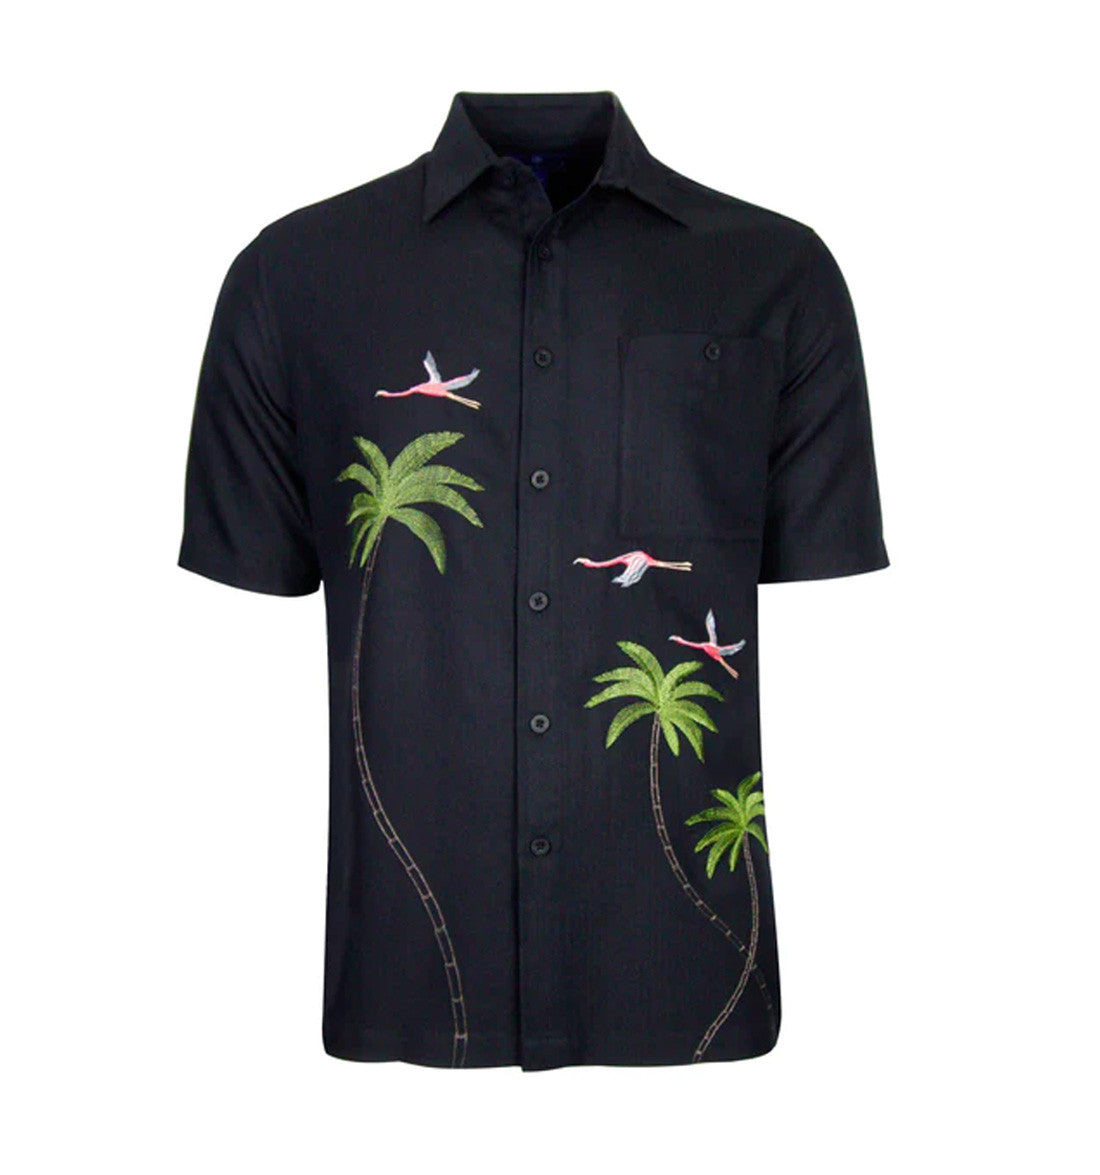 Flamingo Coast Embroidered Shirt by Weekender